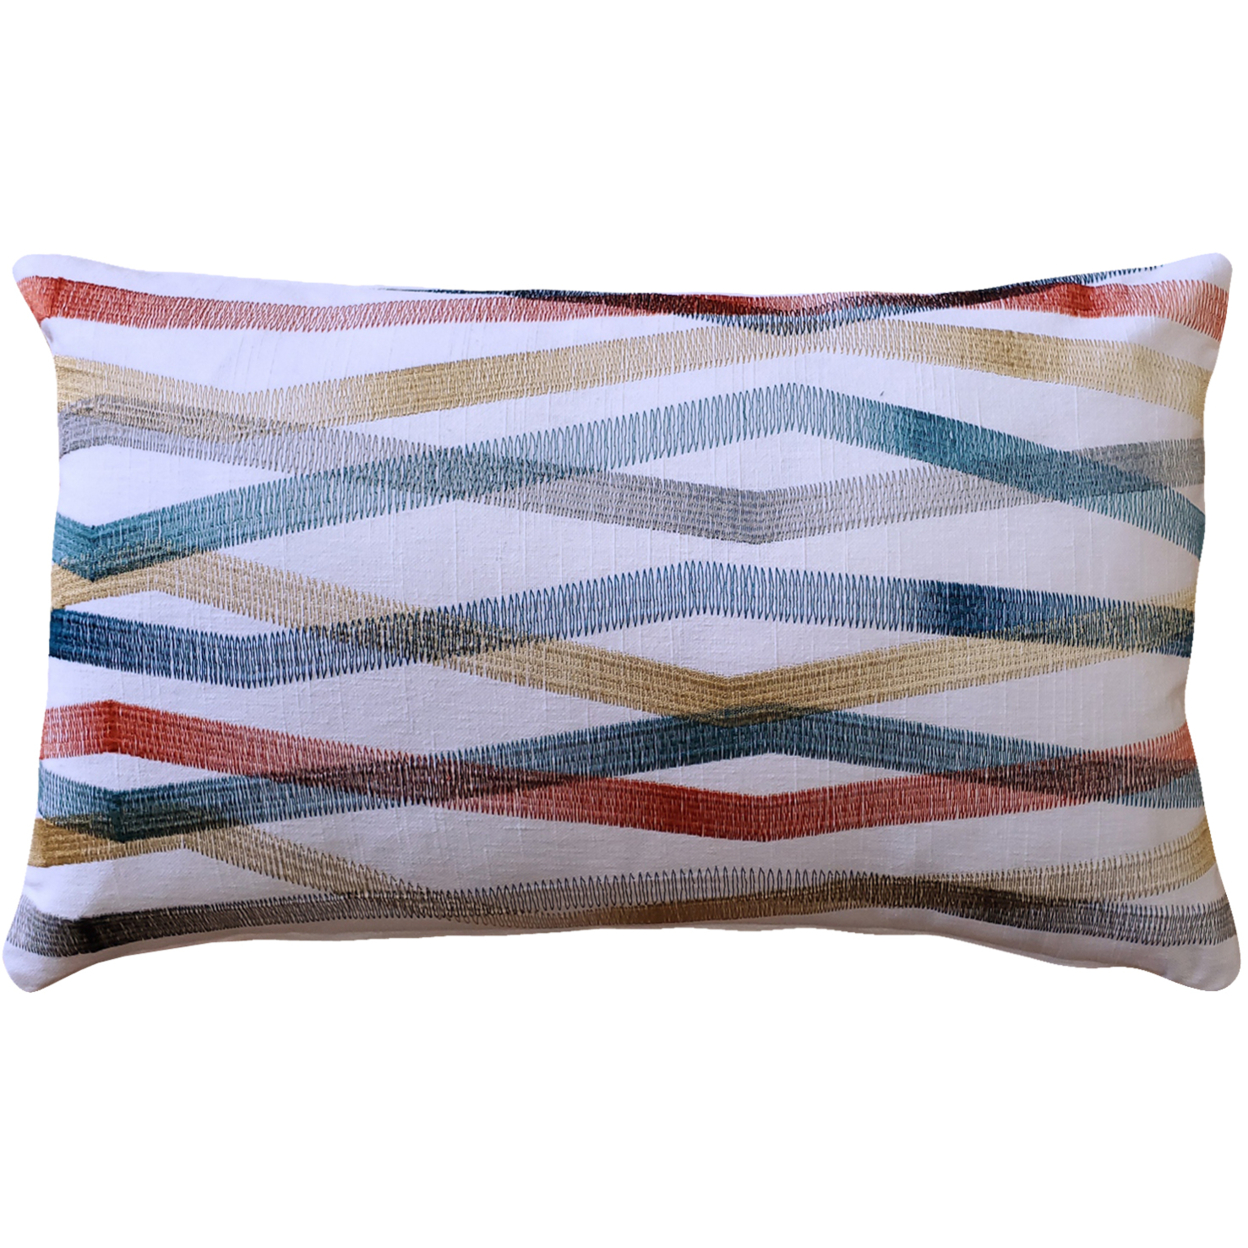 Wandering Lines Ocean Coast Throw Pillow 12x19 Inches Square, Complete Pillow With Polyfill Pillow Insert